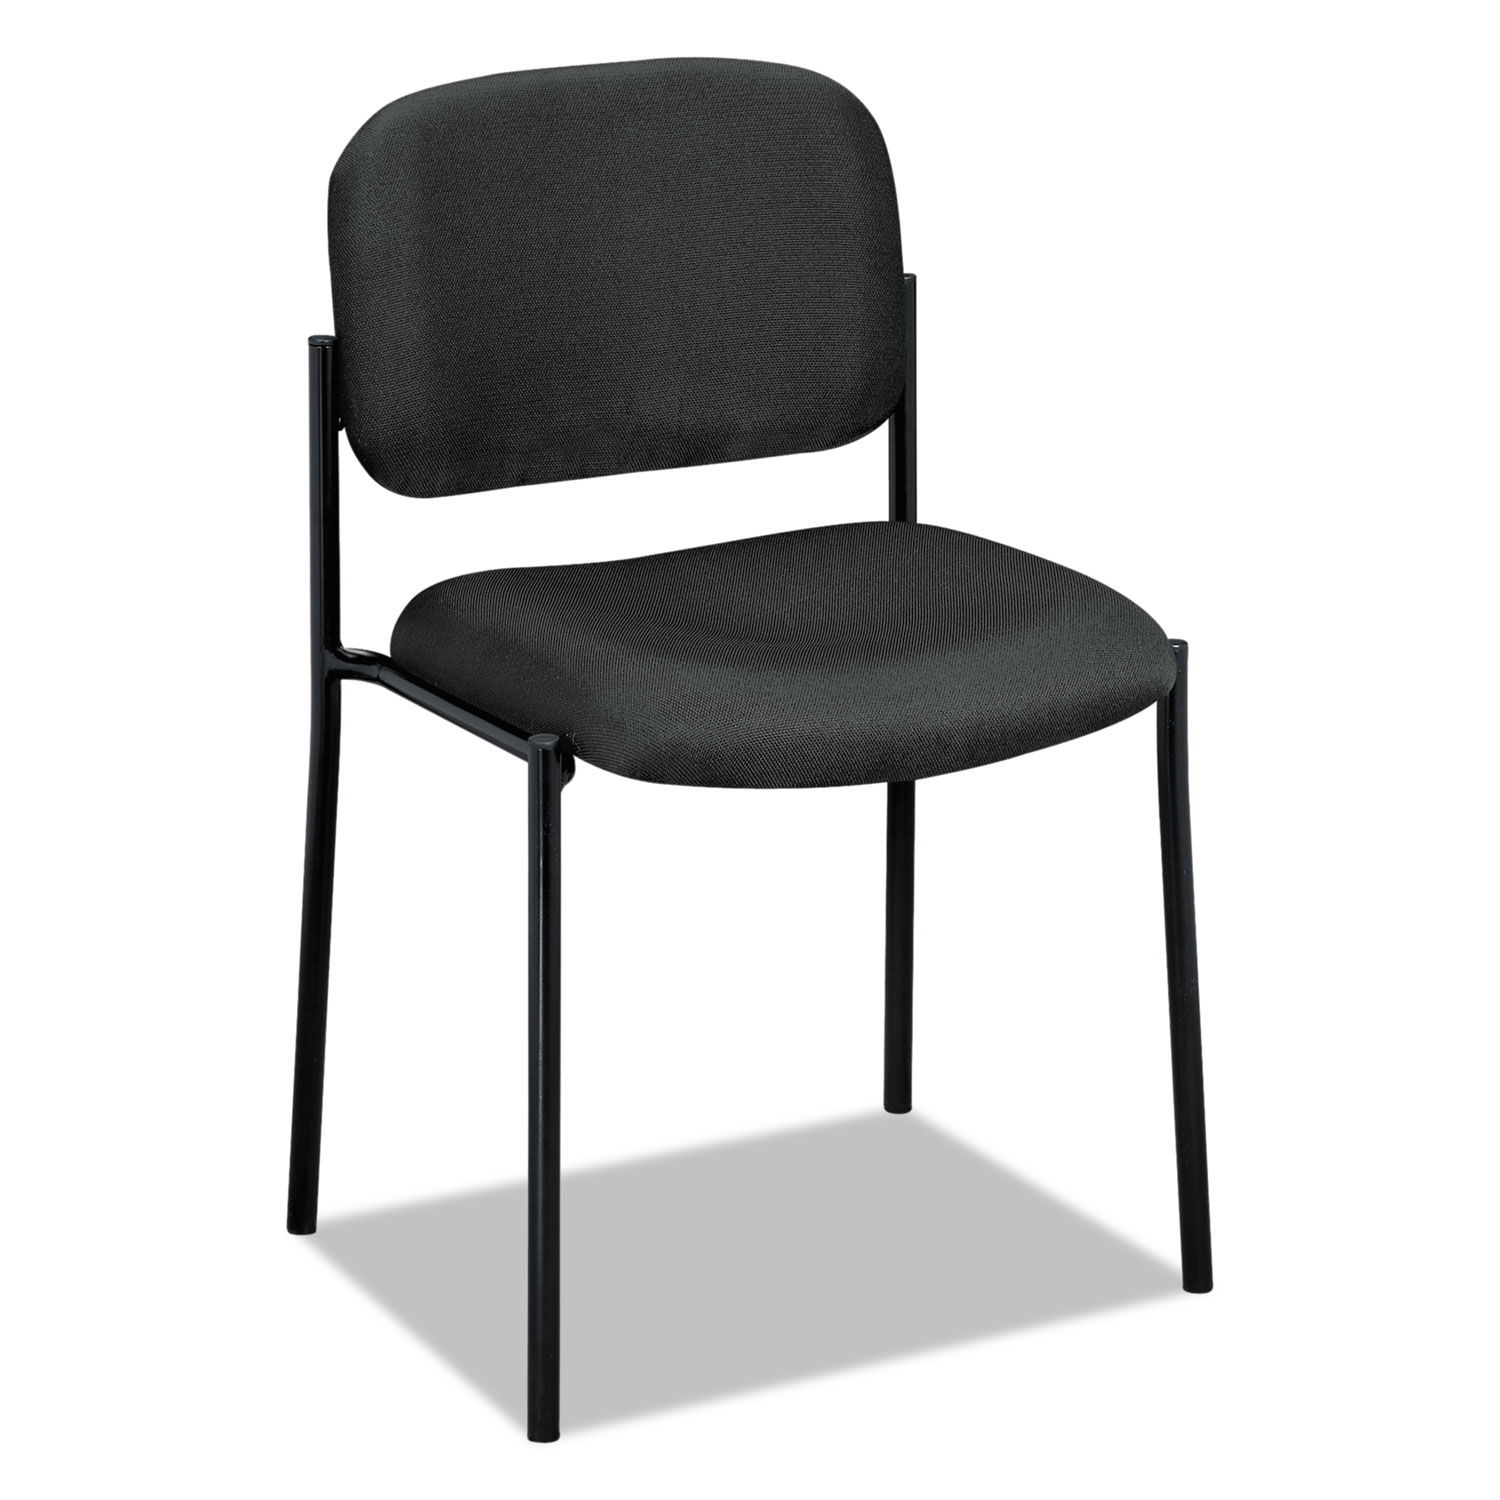 Basyx VL606 Series Stacking Armless Guest Chair, Charcoal Fabric